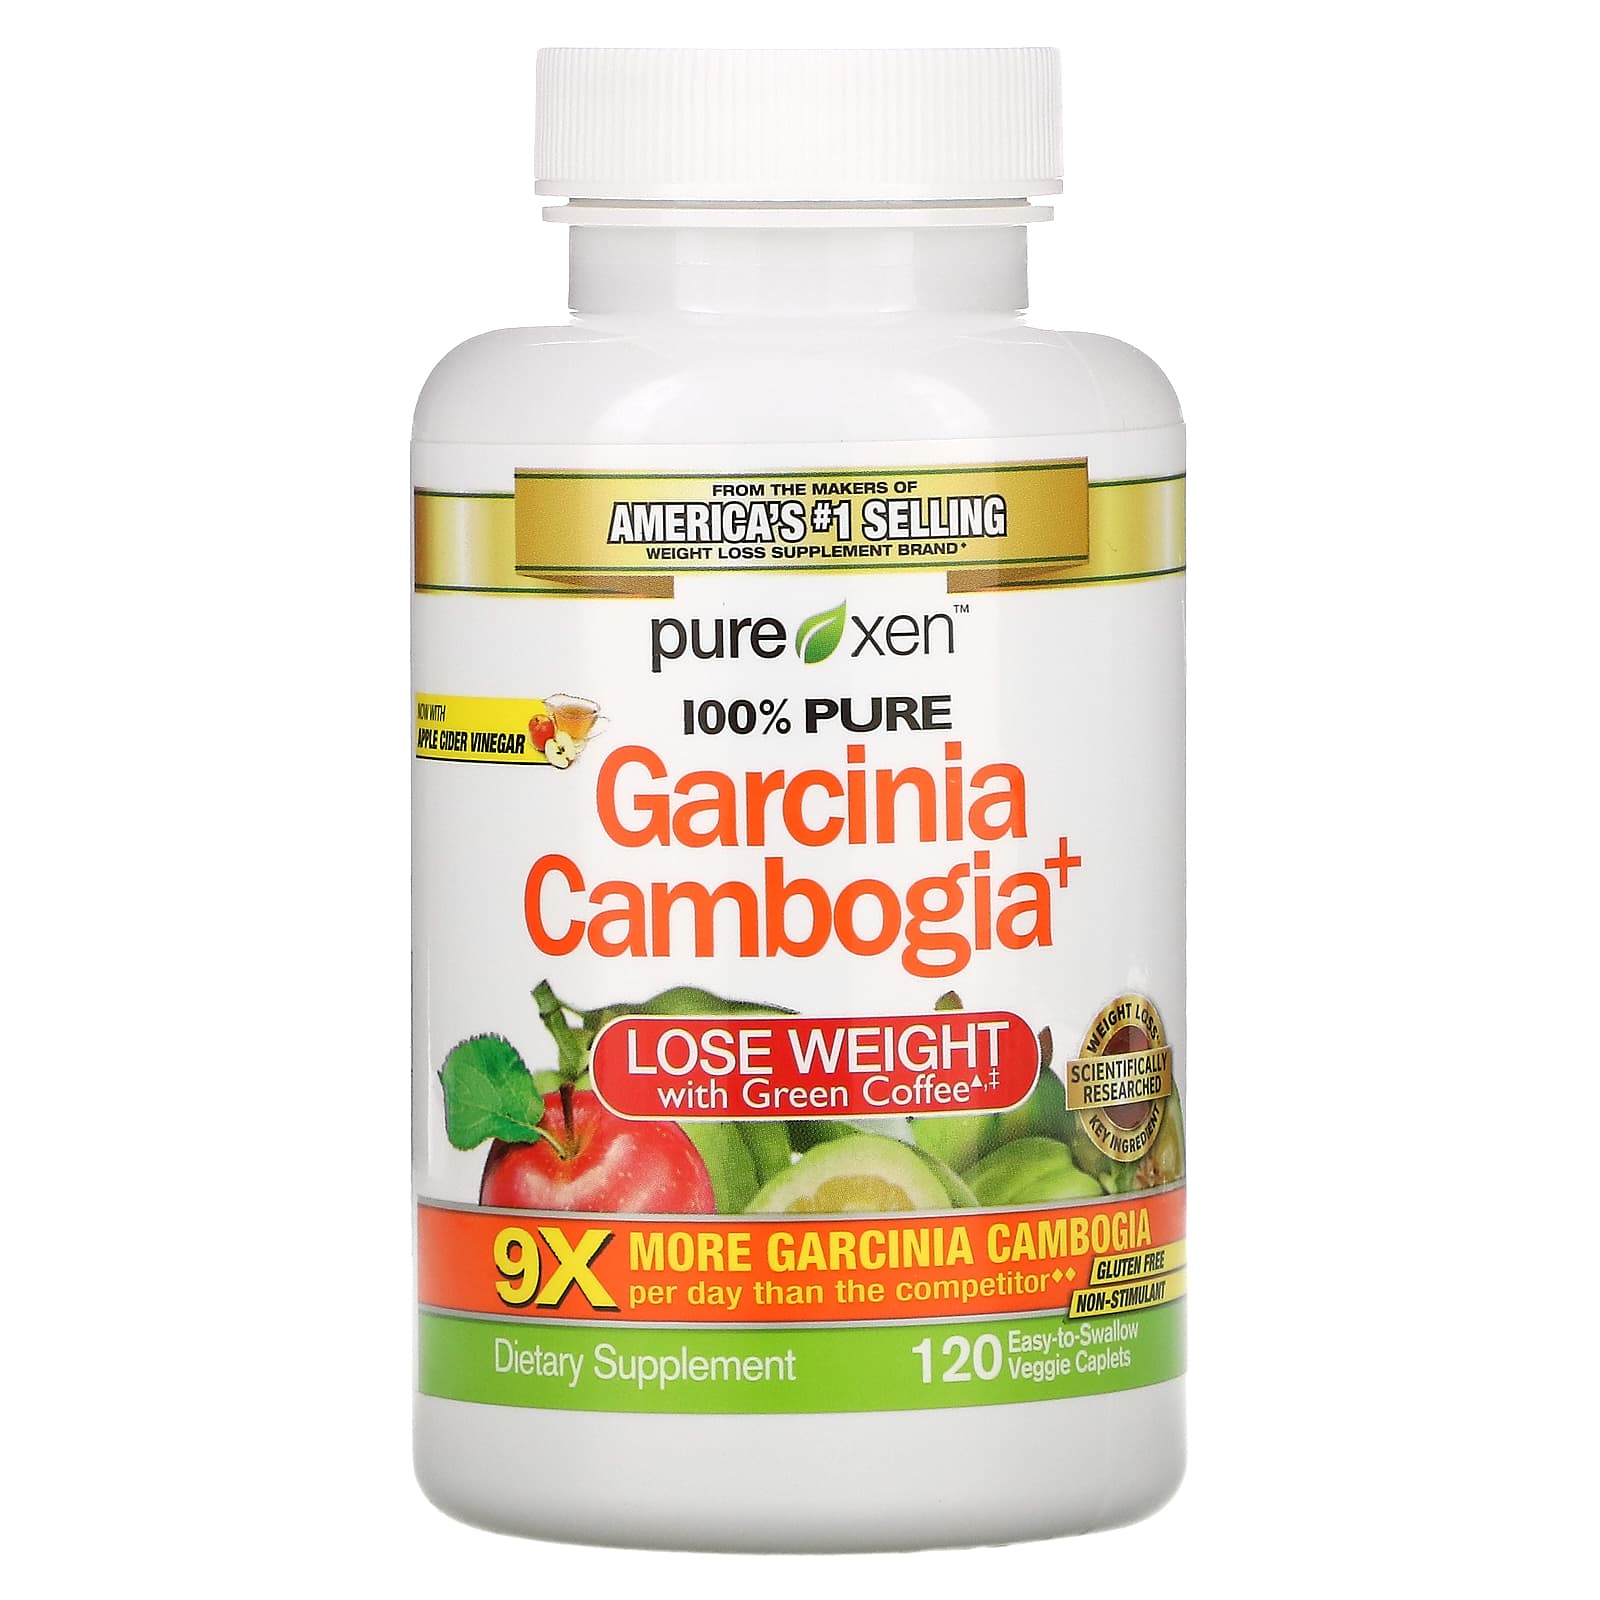 Weight loss Diet Garcinia Cambogia Weight loss Coffee